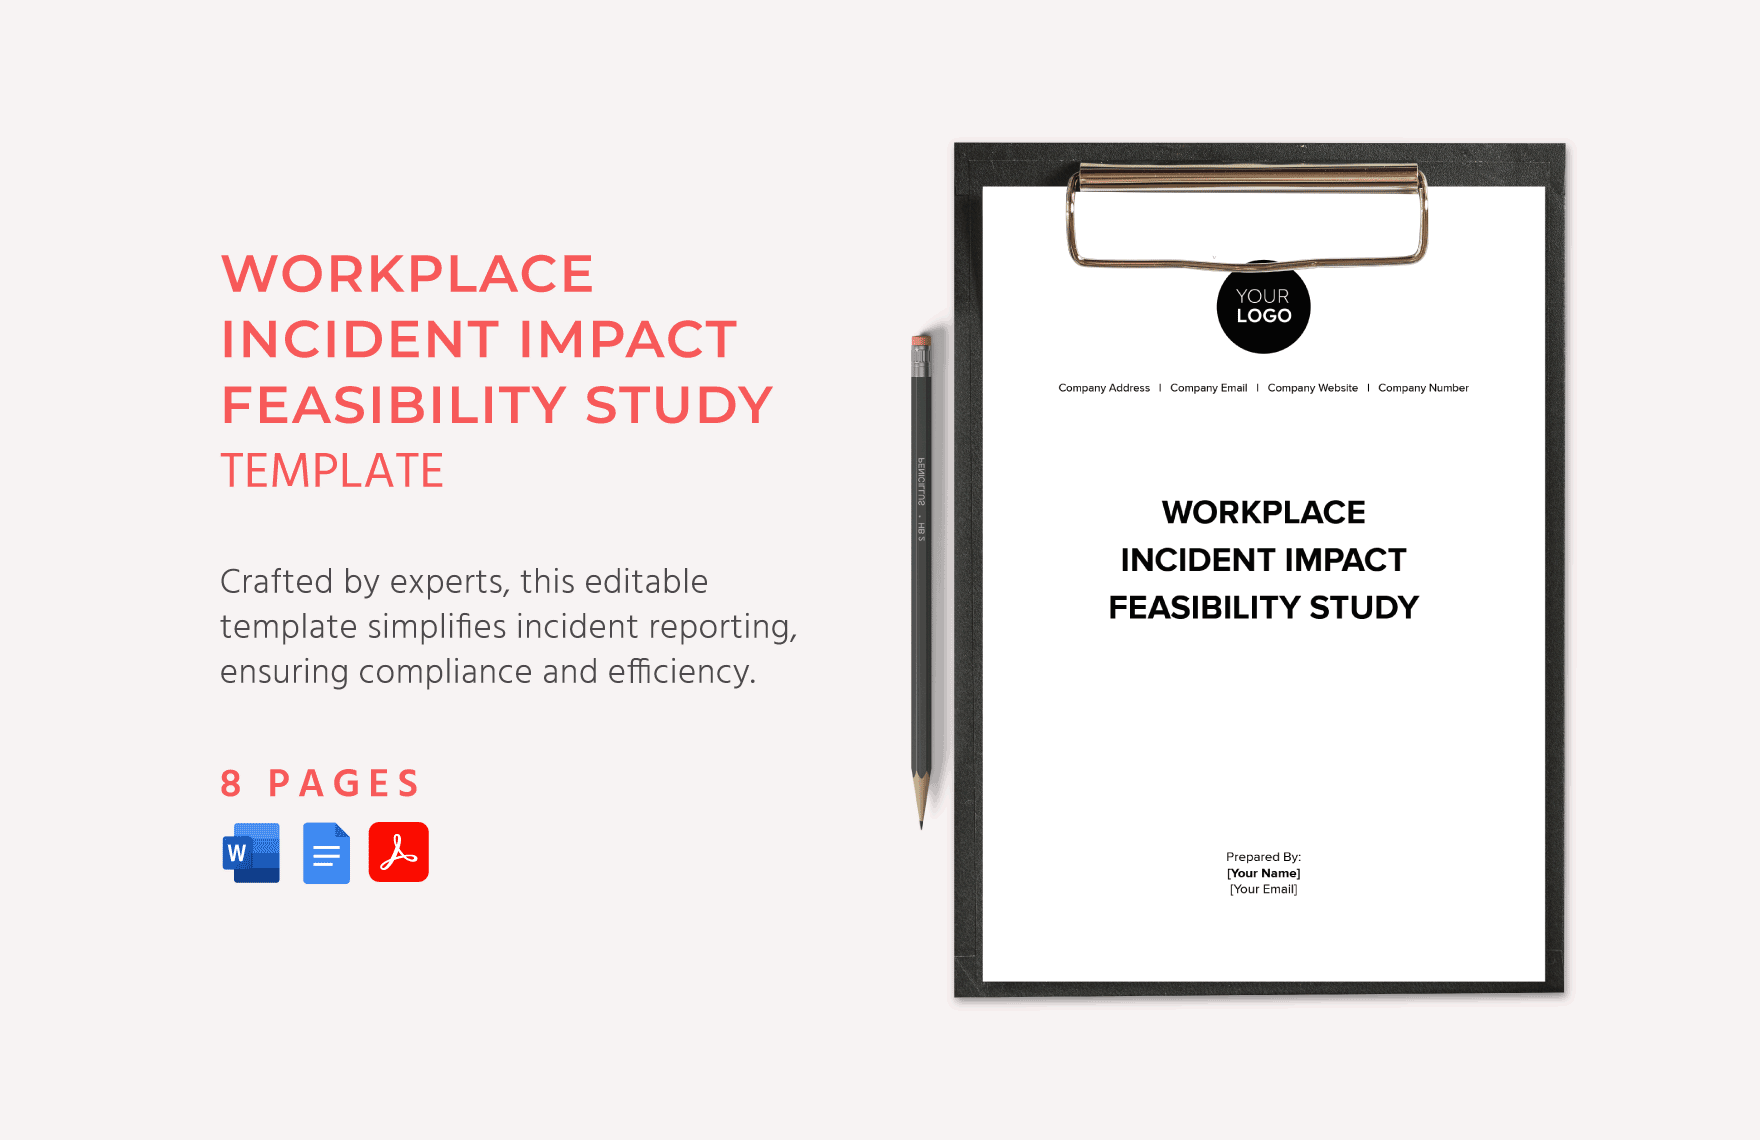 Workplace Incident Impact Feasibility Study Template